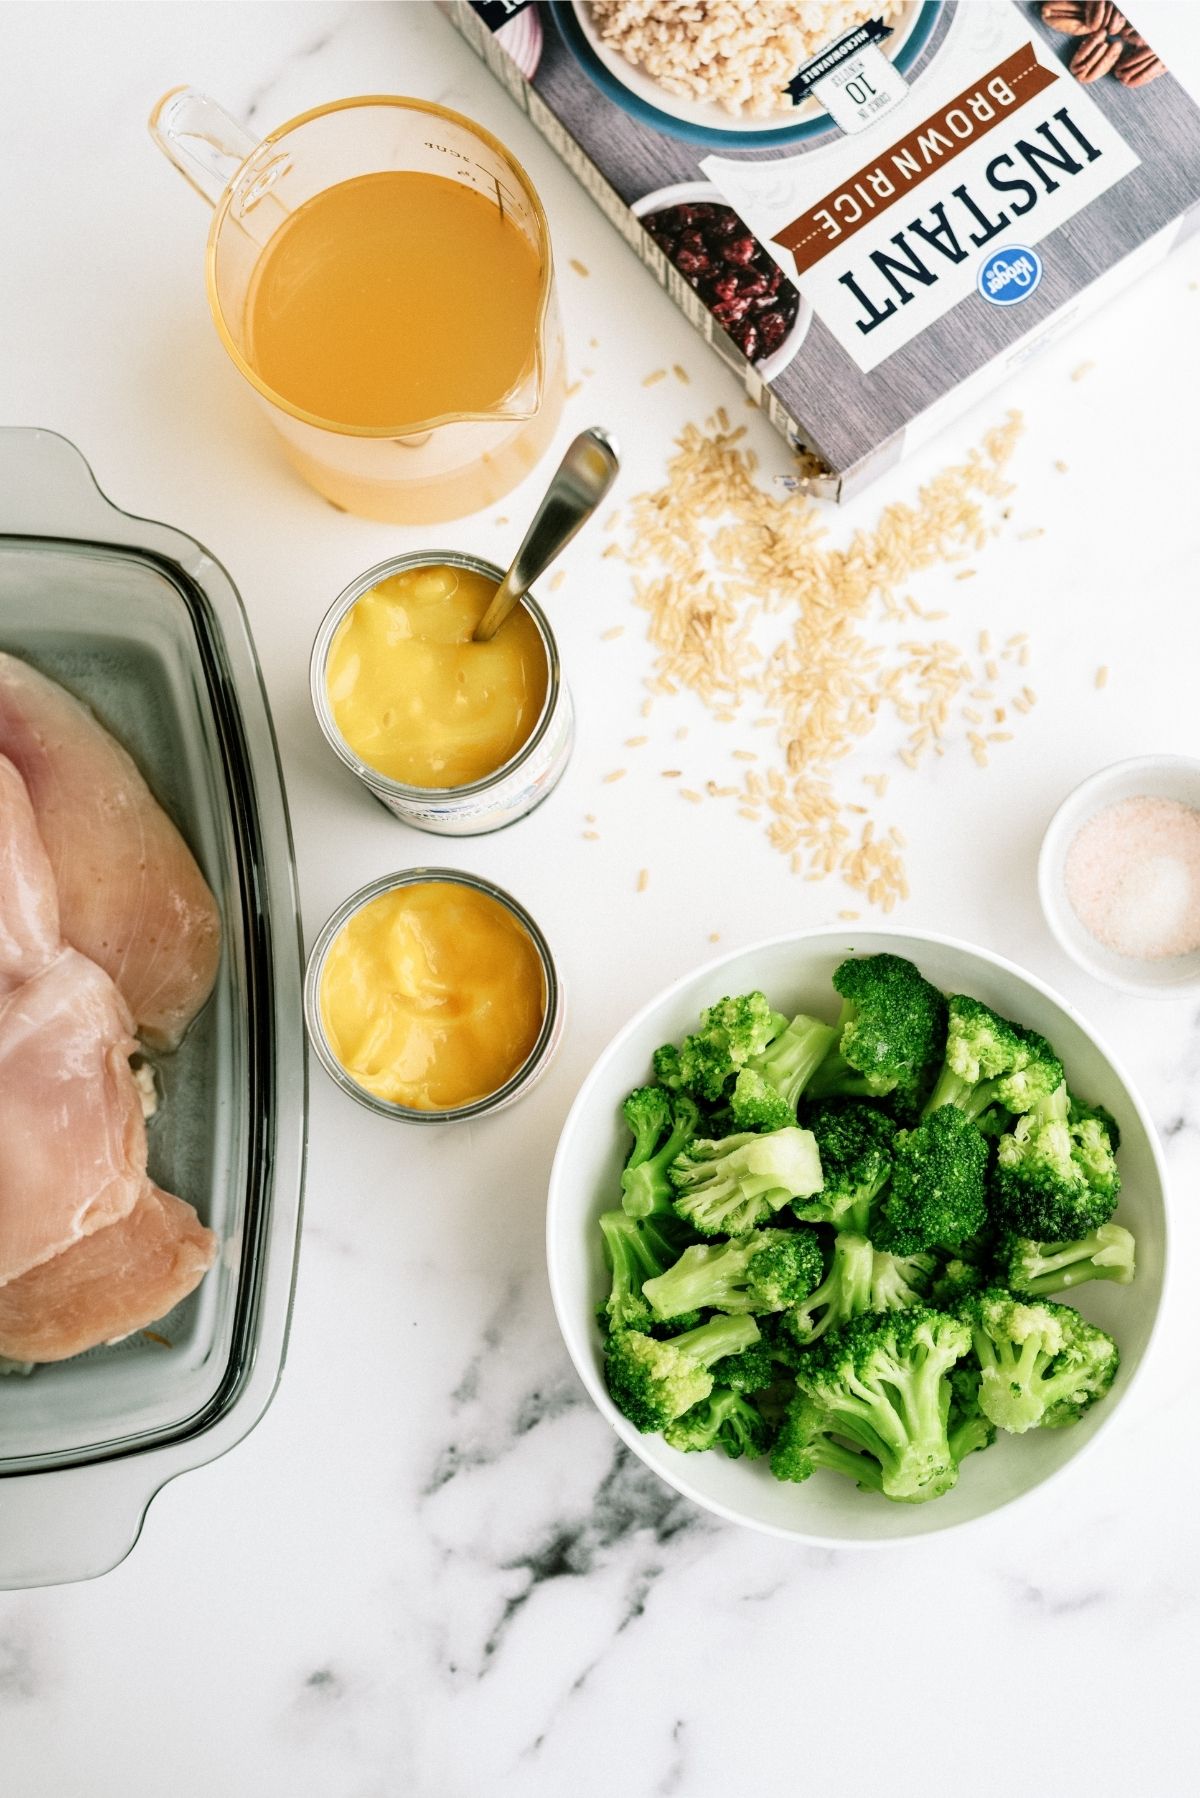 Ingredients for Slow Cooker Chicken and Broccoli Over Rice